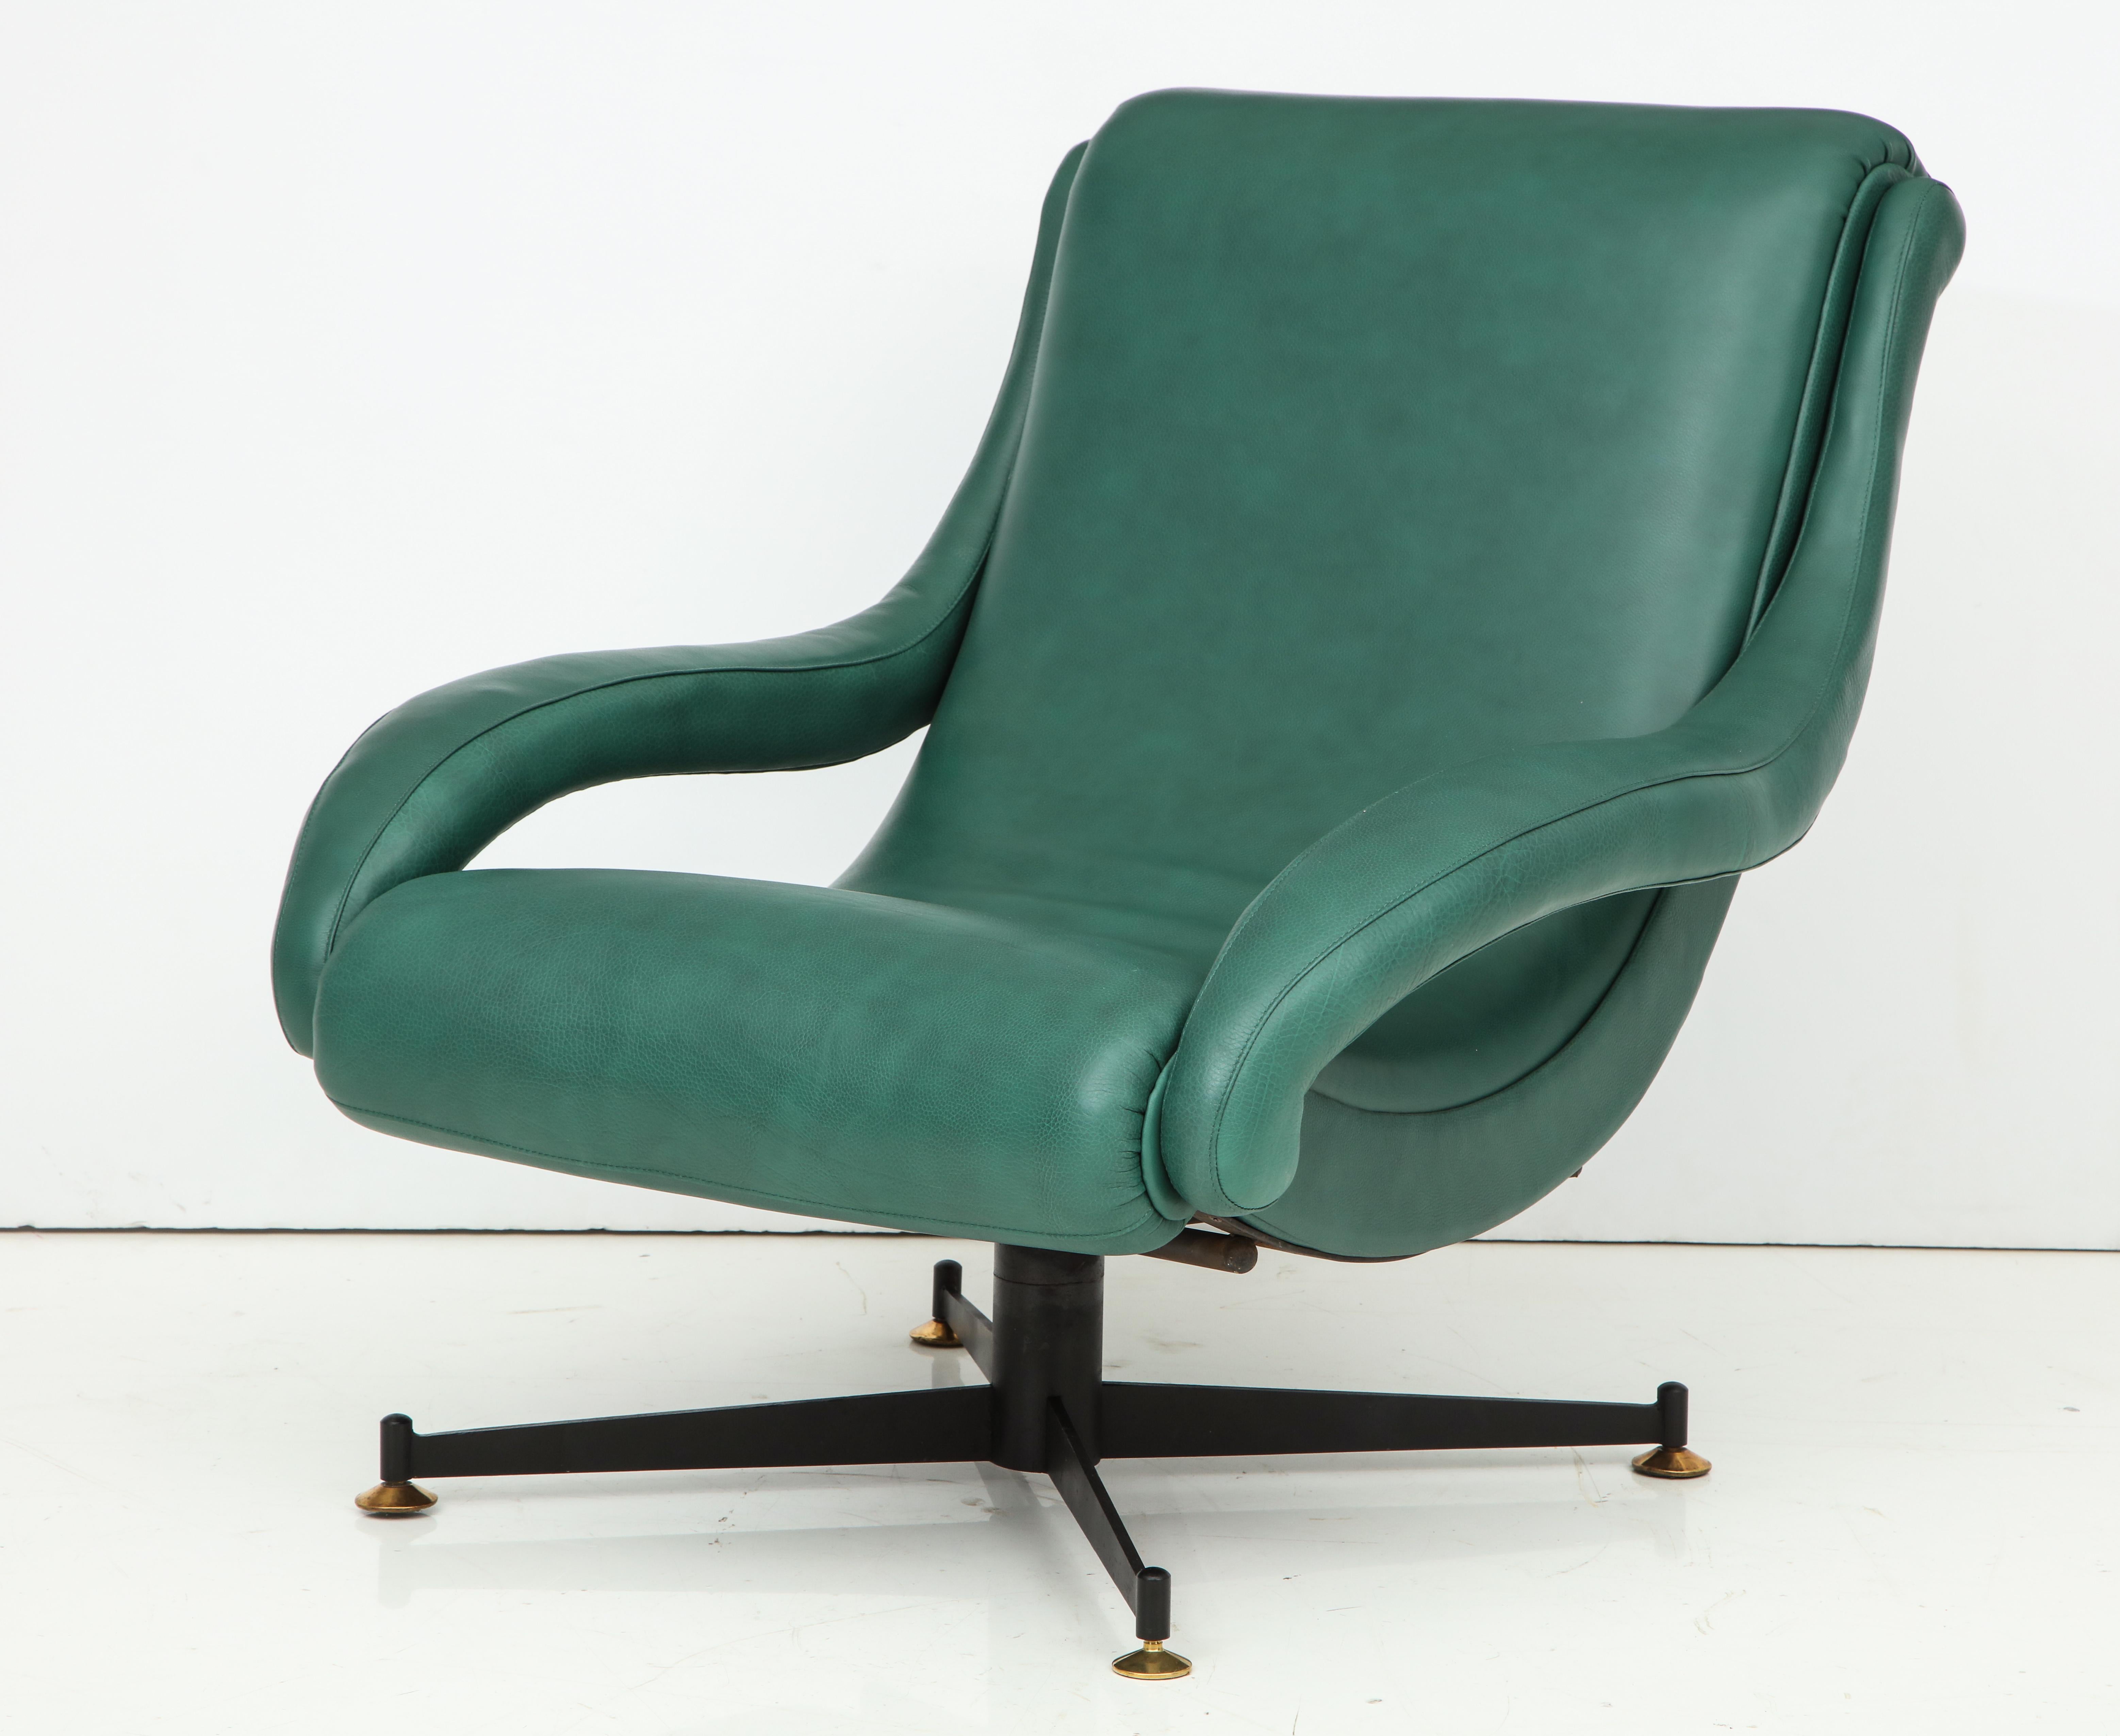 Mid-Century Modern Pair of Lounge Chairs in Gucci Green Leather by Radice for Lenzi, c. 1950, Italy